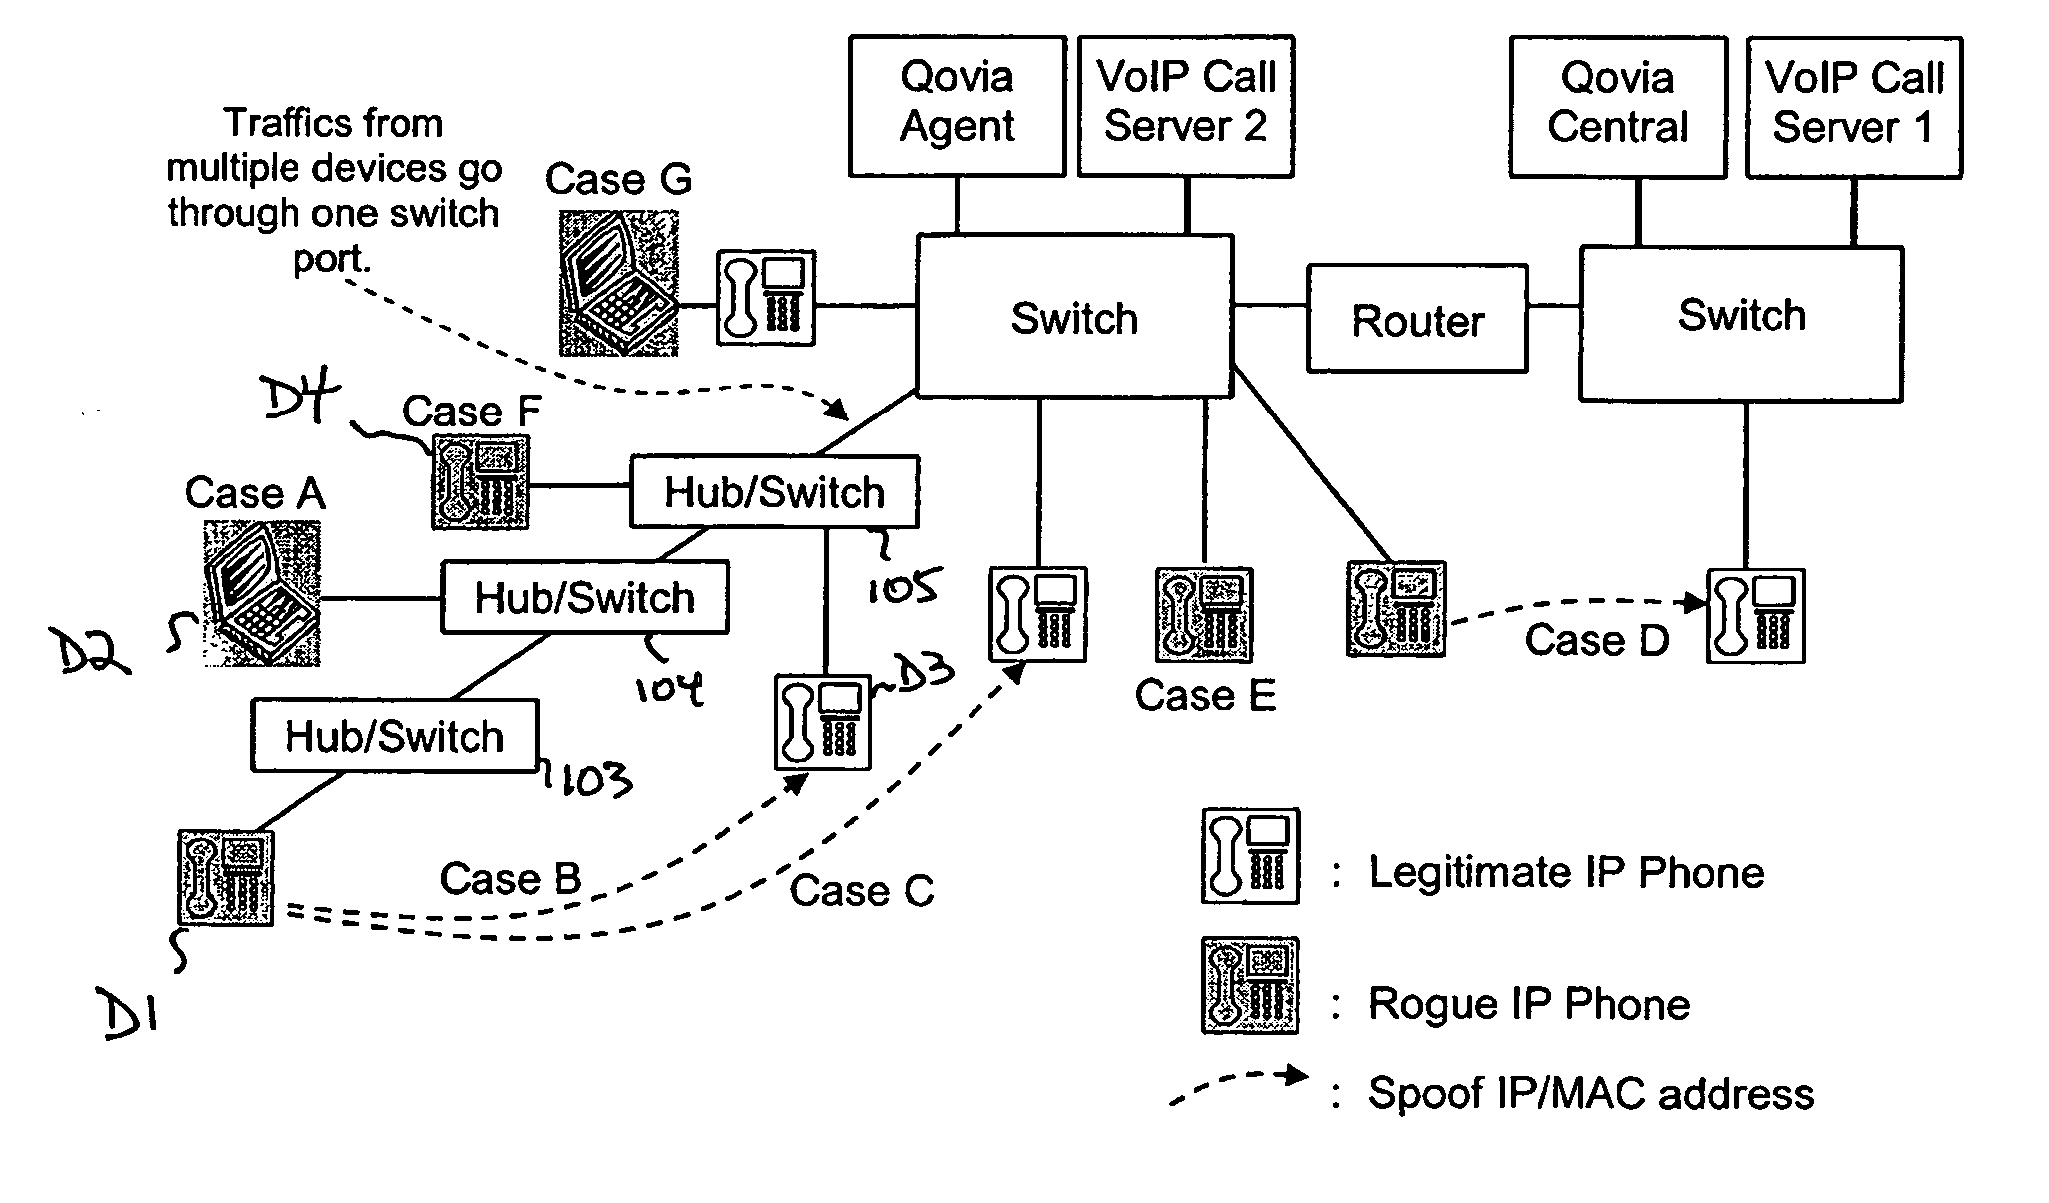 System and apparatus for rogue VoIP phone detection and managing VoIP phone mobility